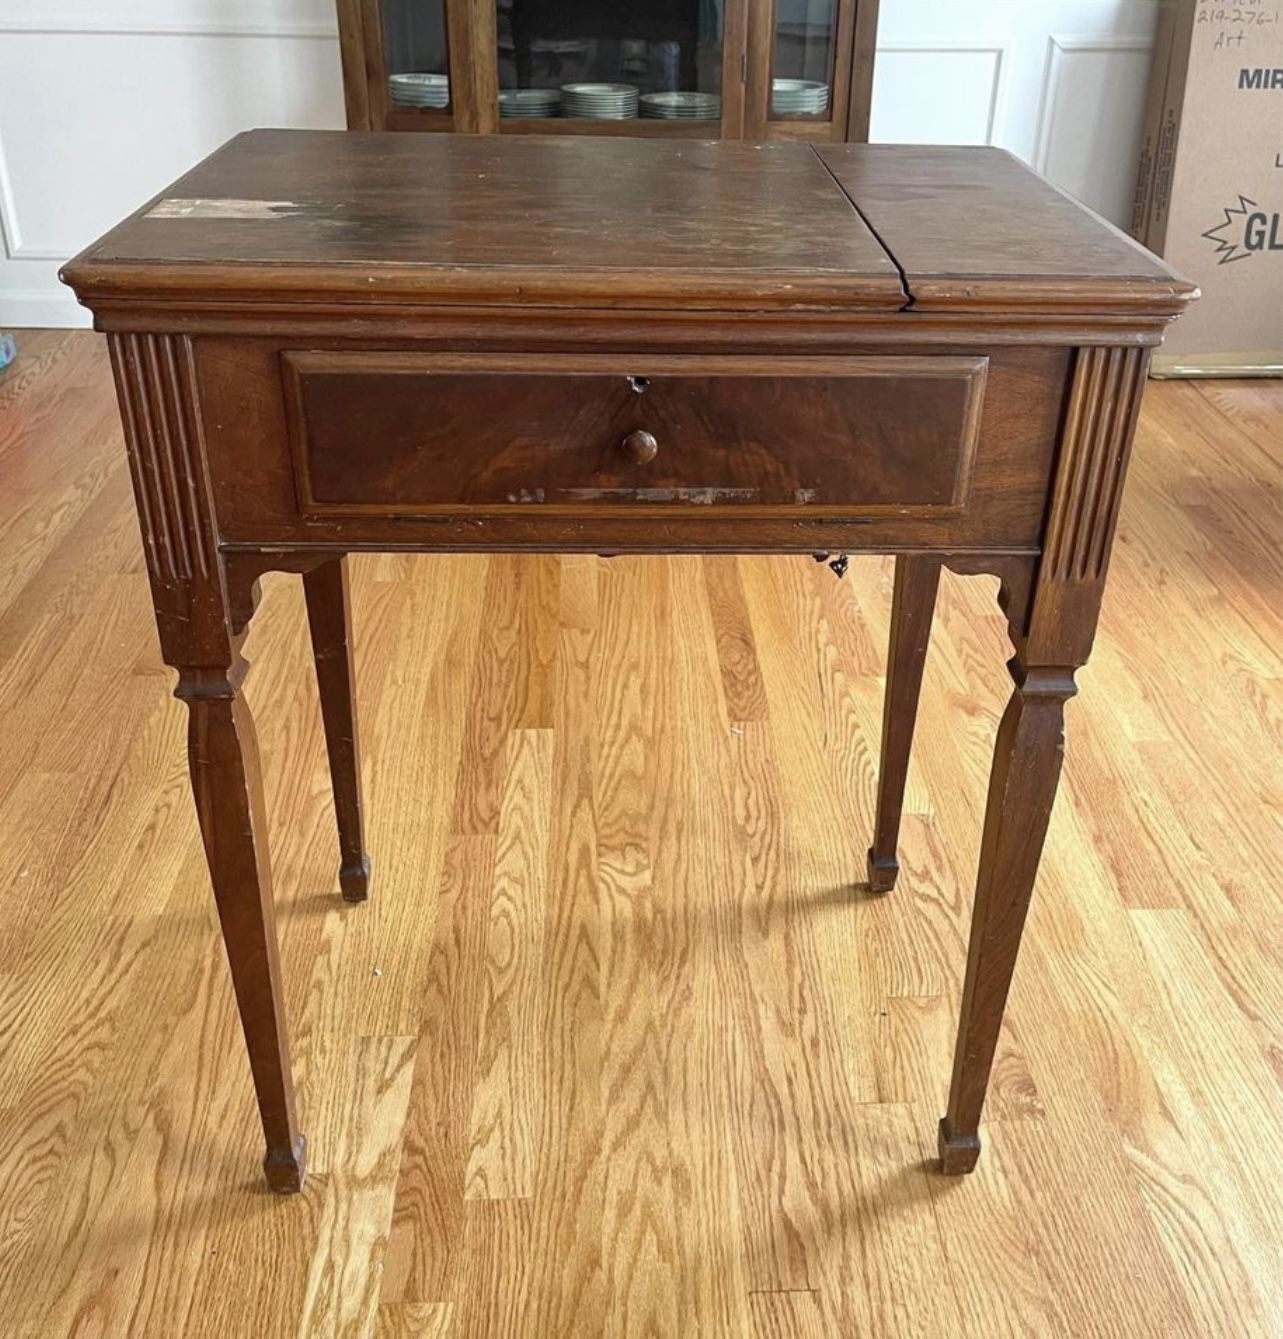 Antique Singer Sewing Table With Machine for Sale in Houston, TX - OfferUp